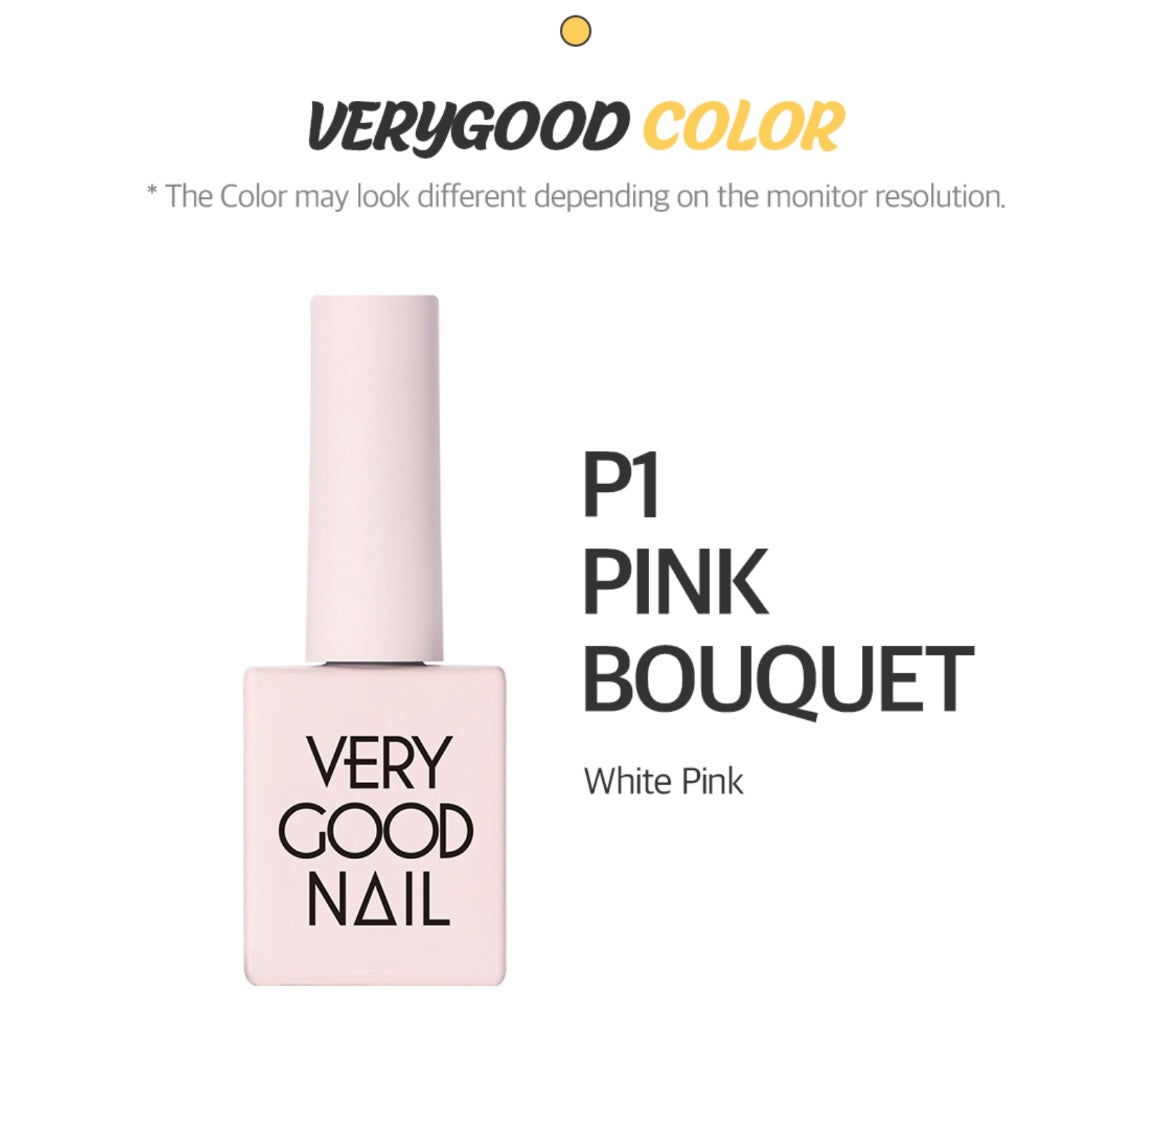 VERY GOOD NAIL P1 pink bouquet